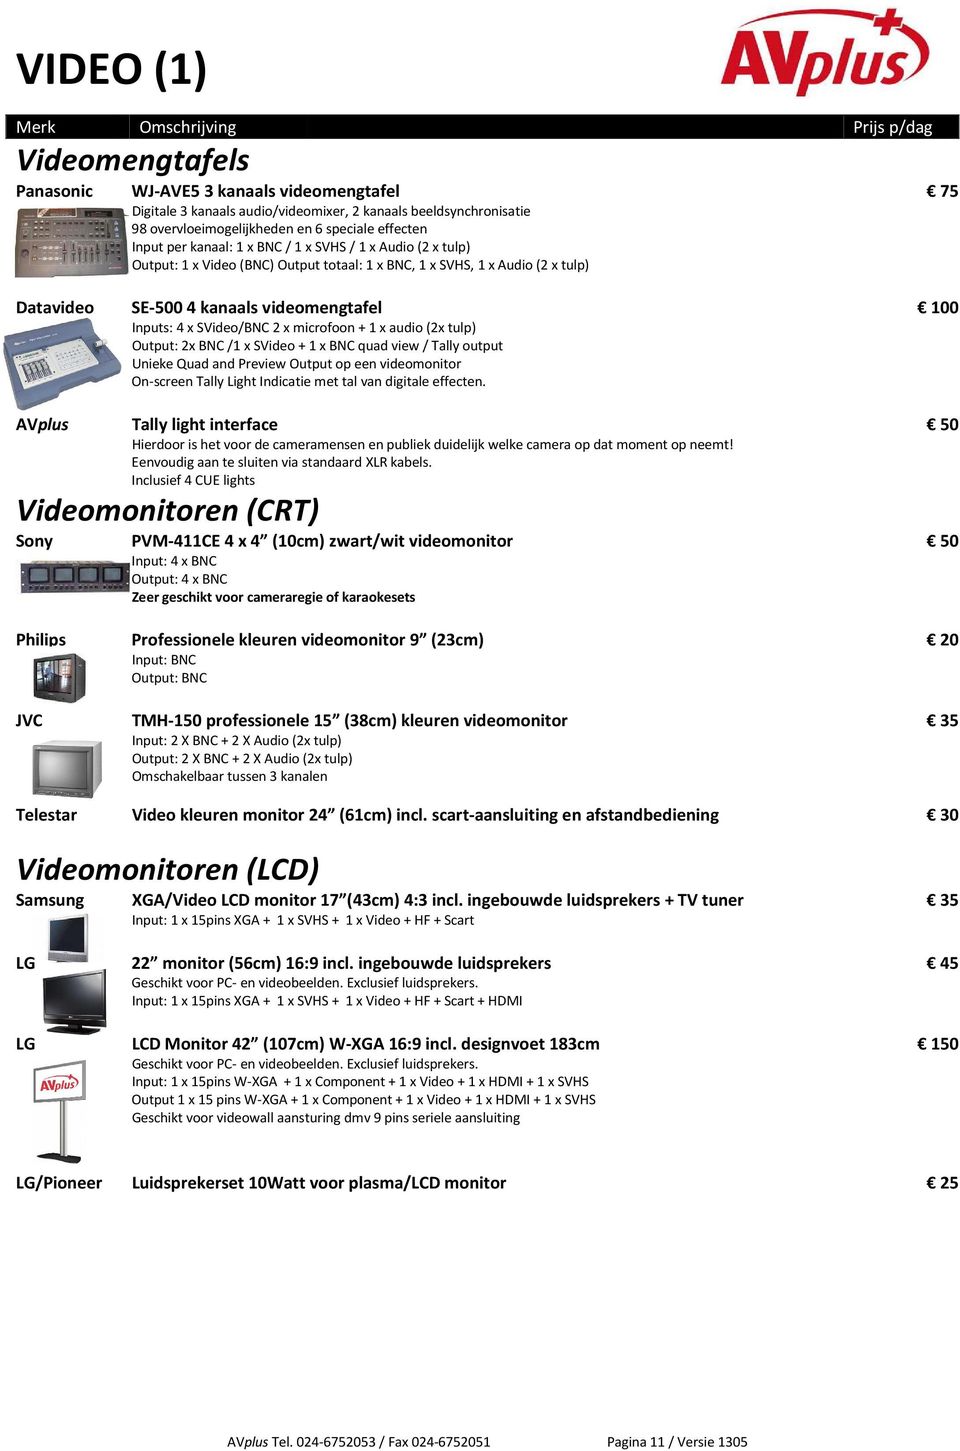 x microfoon + 1 x audio (2x tulp) Output: 2x BNC /1 x SVideo + 1 x BNC quad view / Tally output Unieke Quad and Preview Output op een videomonitor On-screen Tally Light Indicatie met tal van digitale